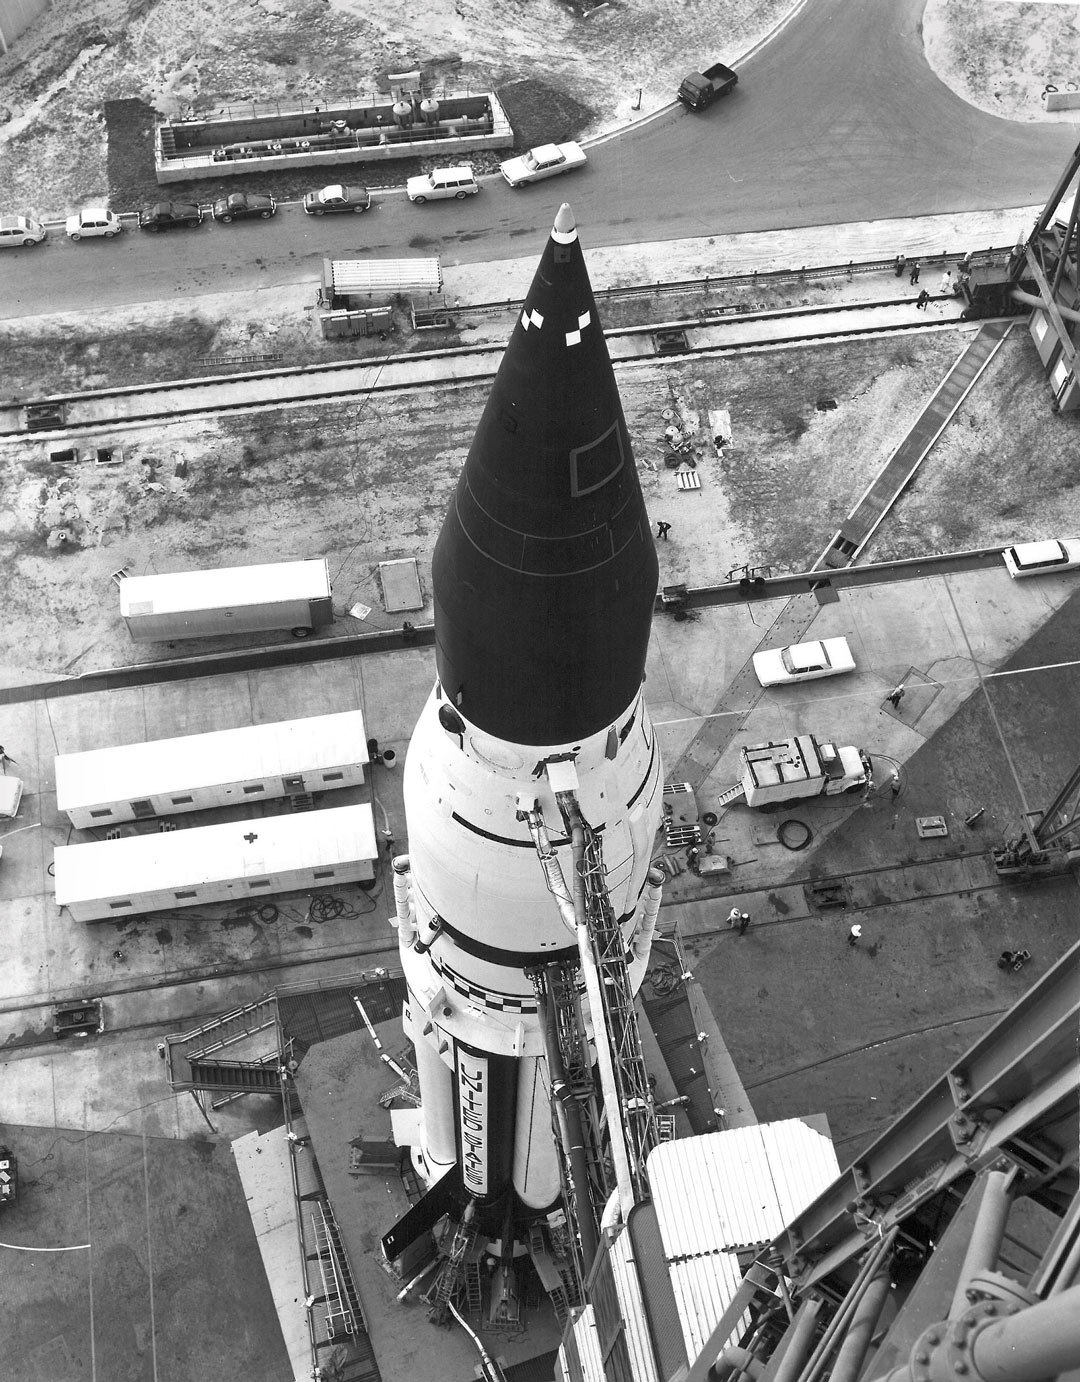 First Saturn I Block II rocket ready for launch, Kennedy Space Center, Cape Canaveral, Florida, 29 January 1964